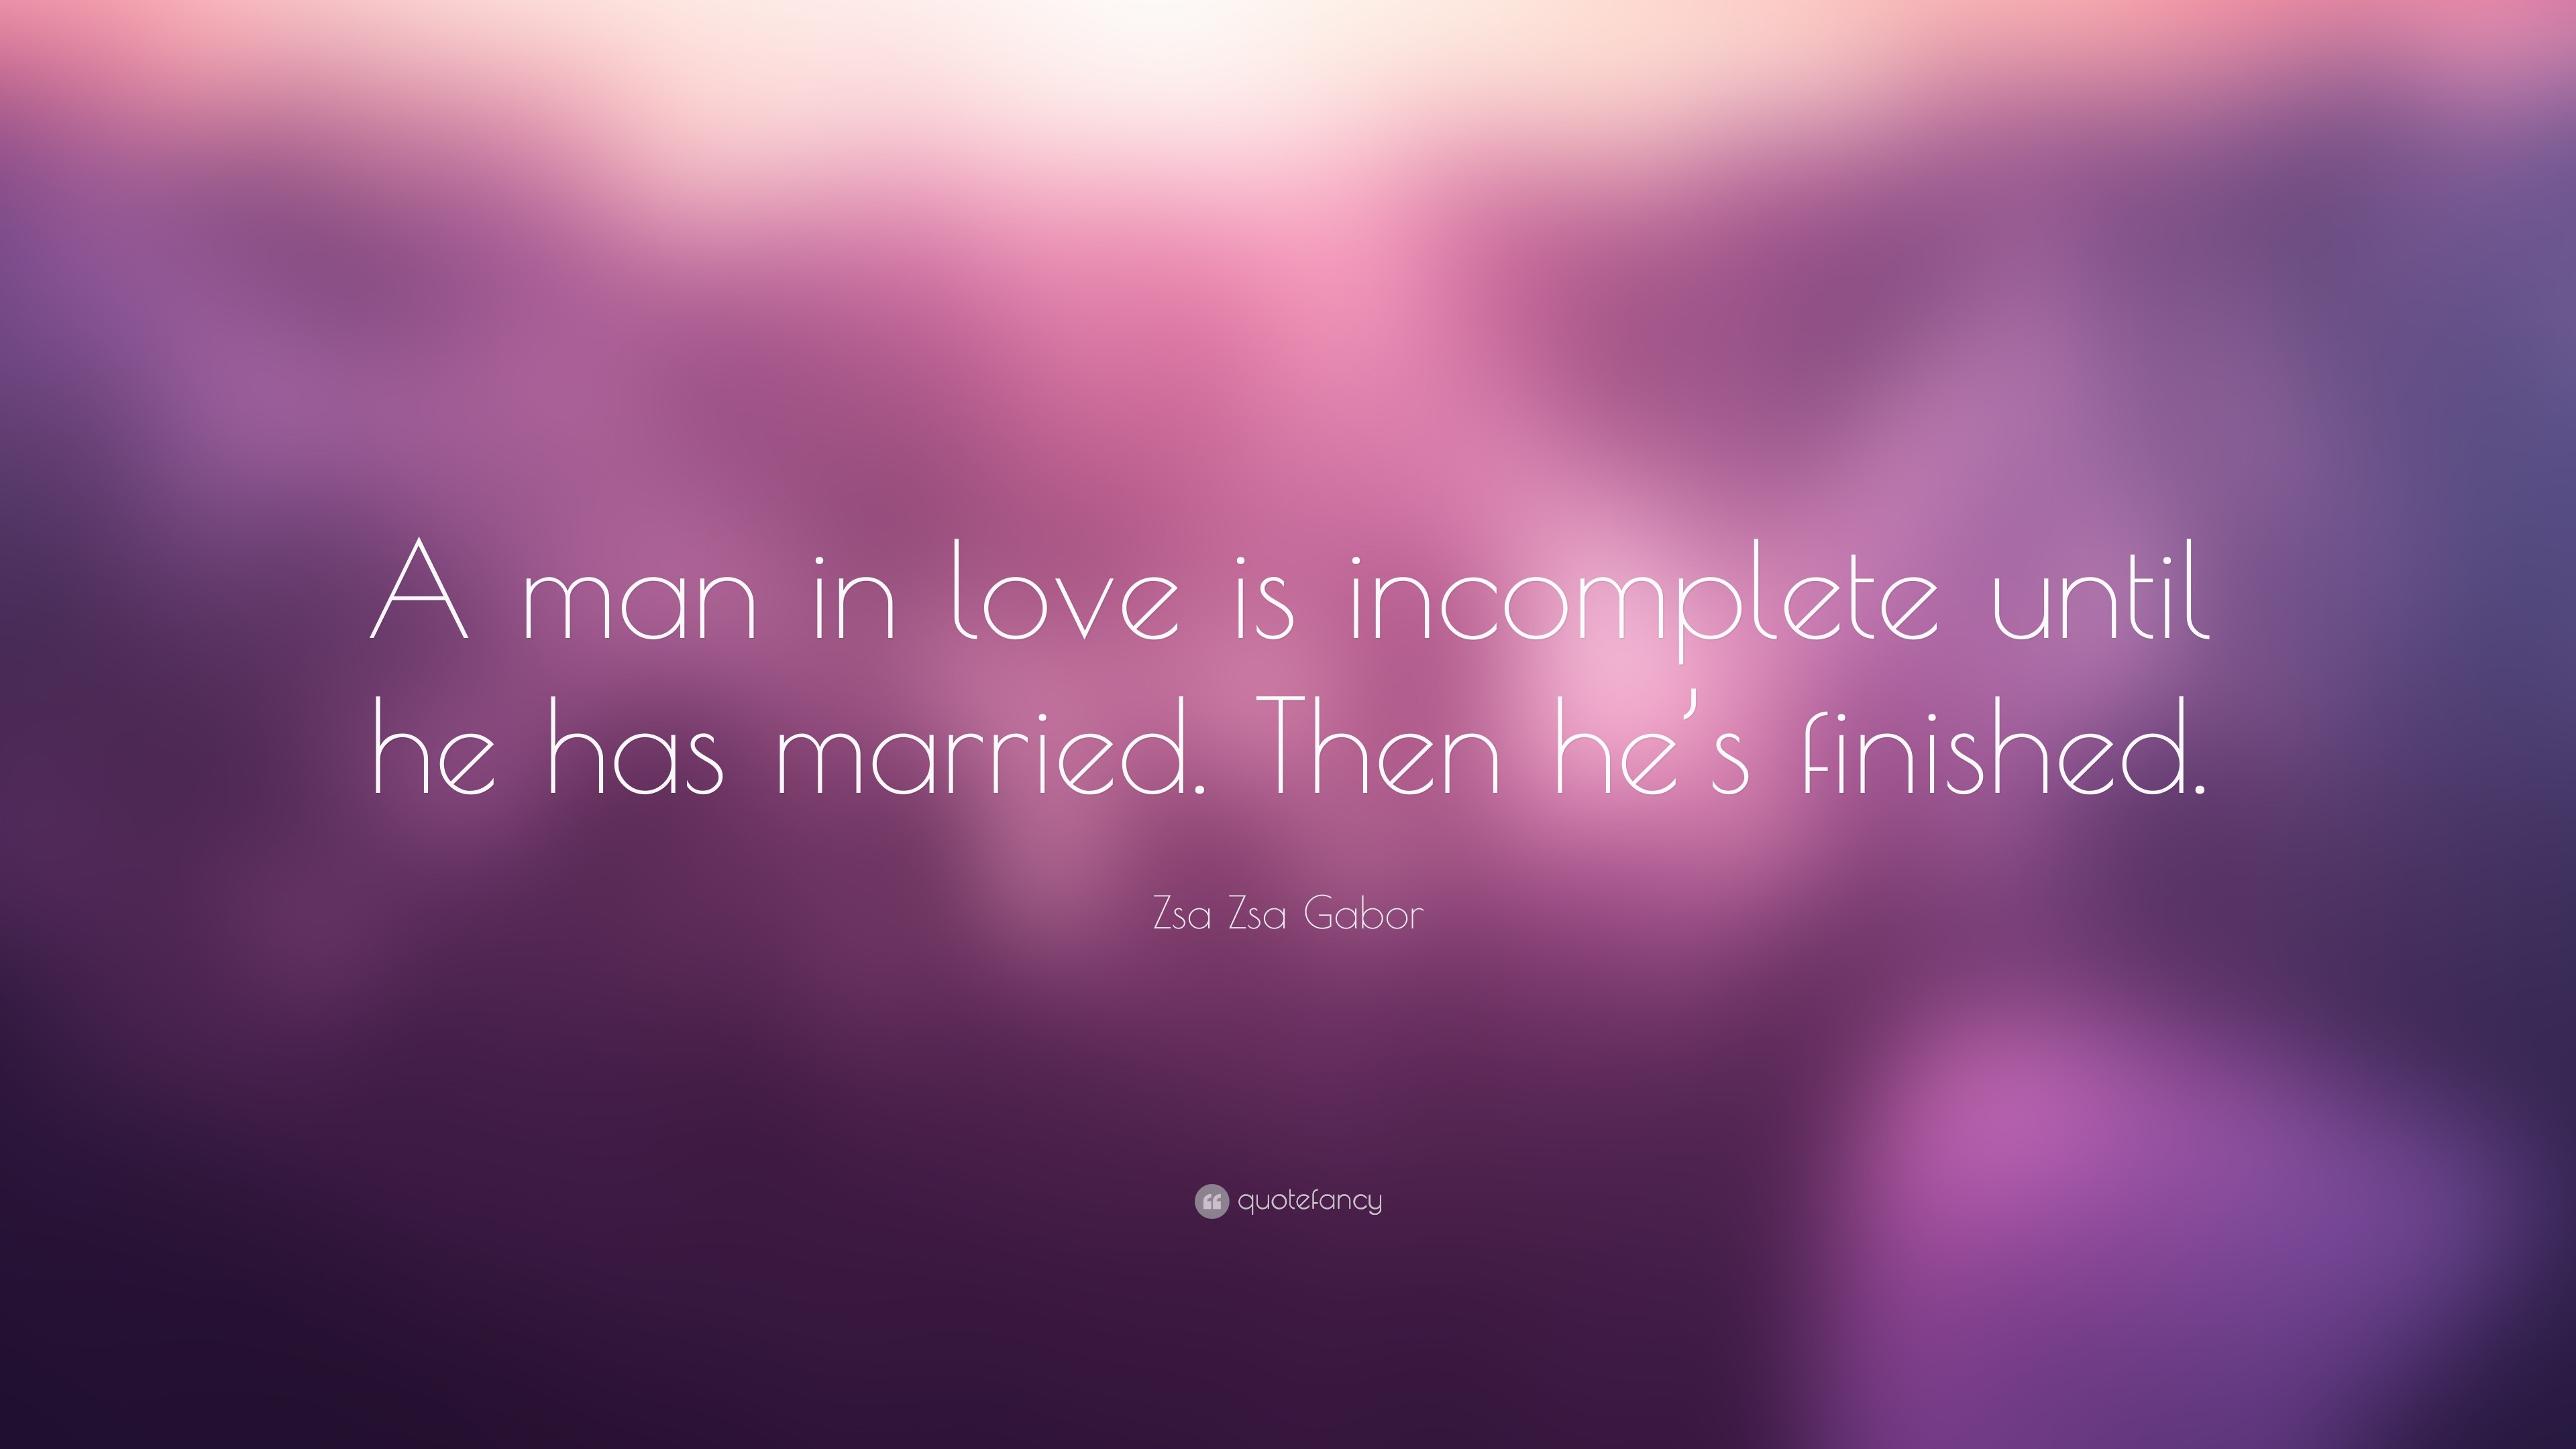 Zsa Zsa Gabor Quote “A man in love is in plete until he has married